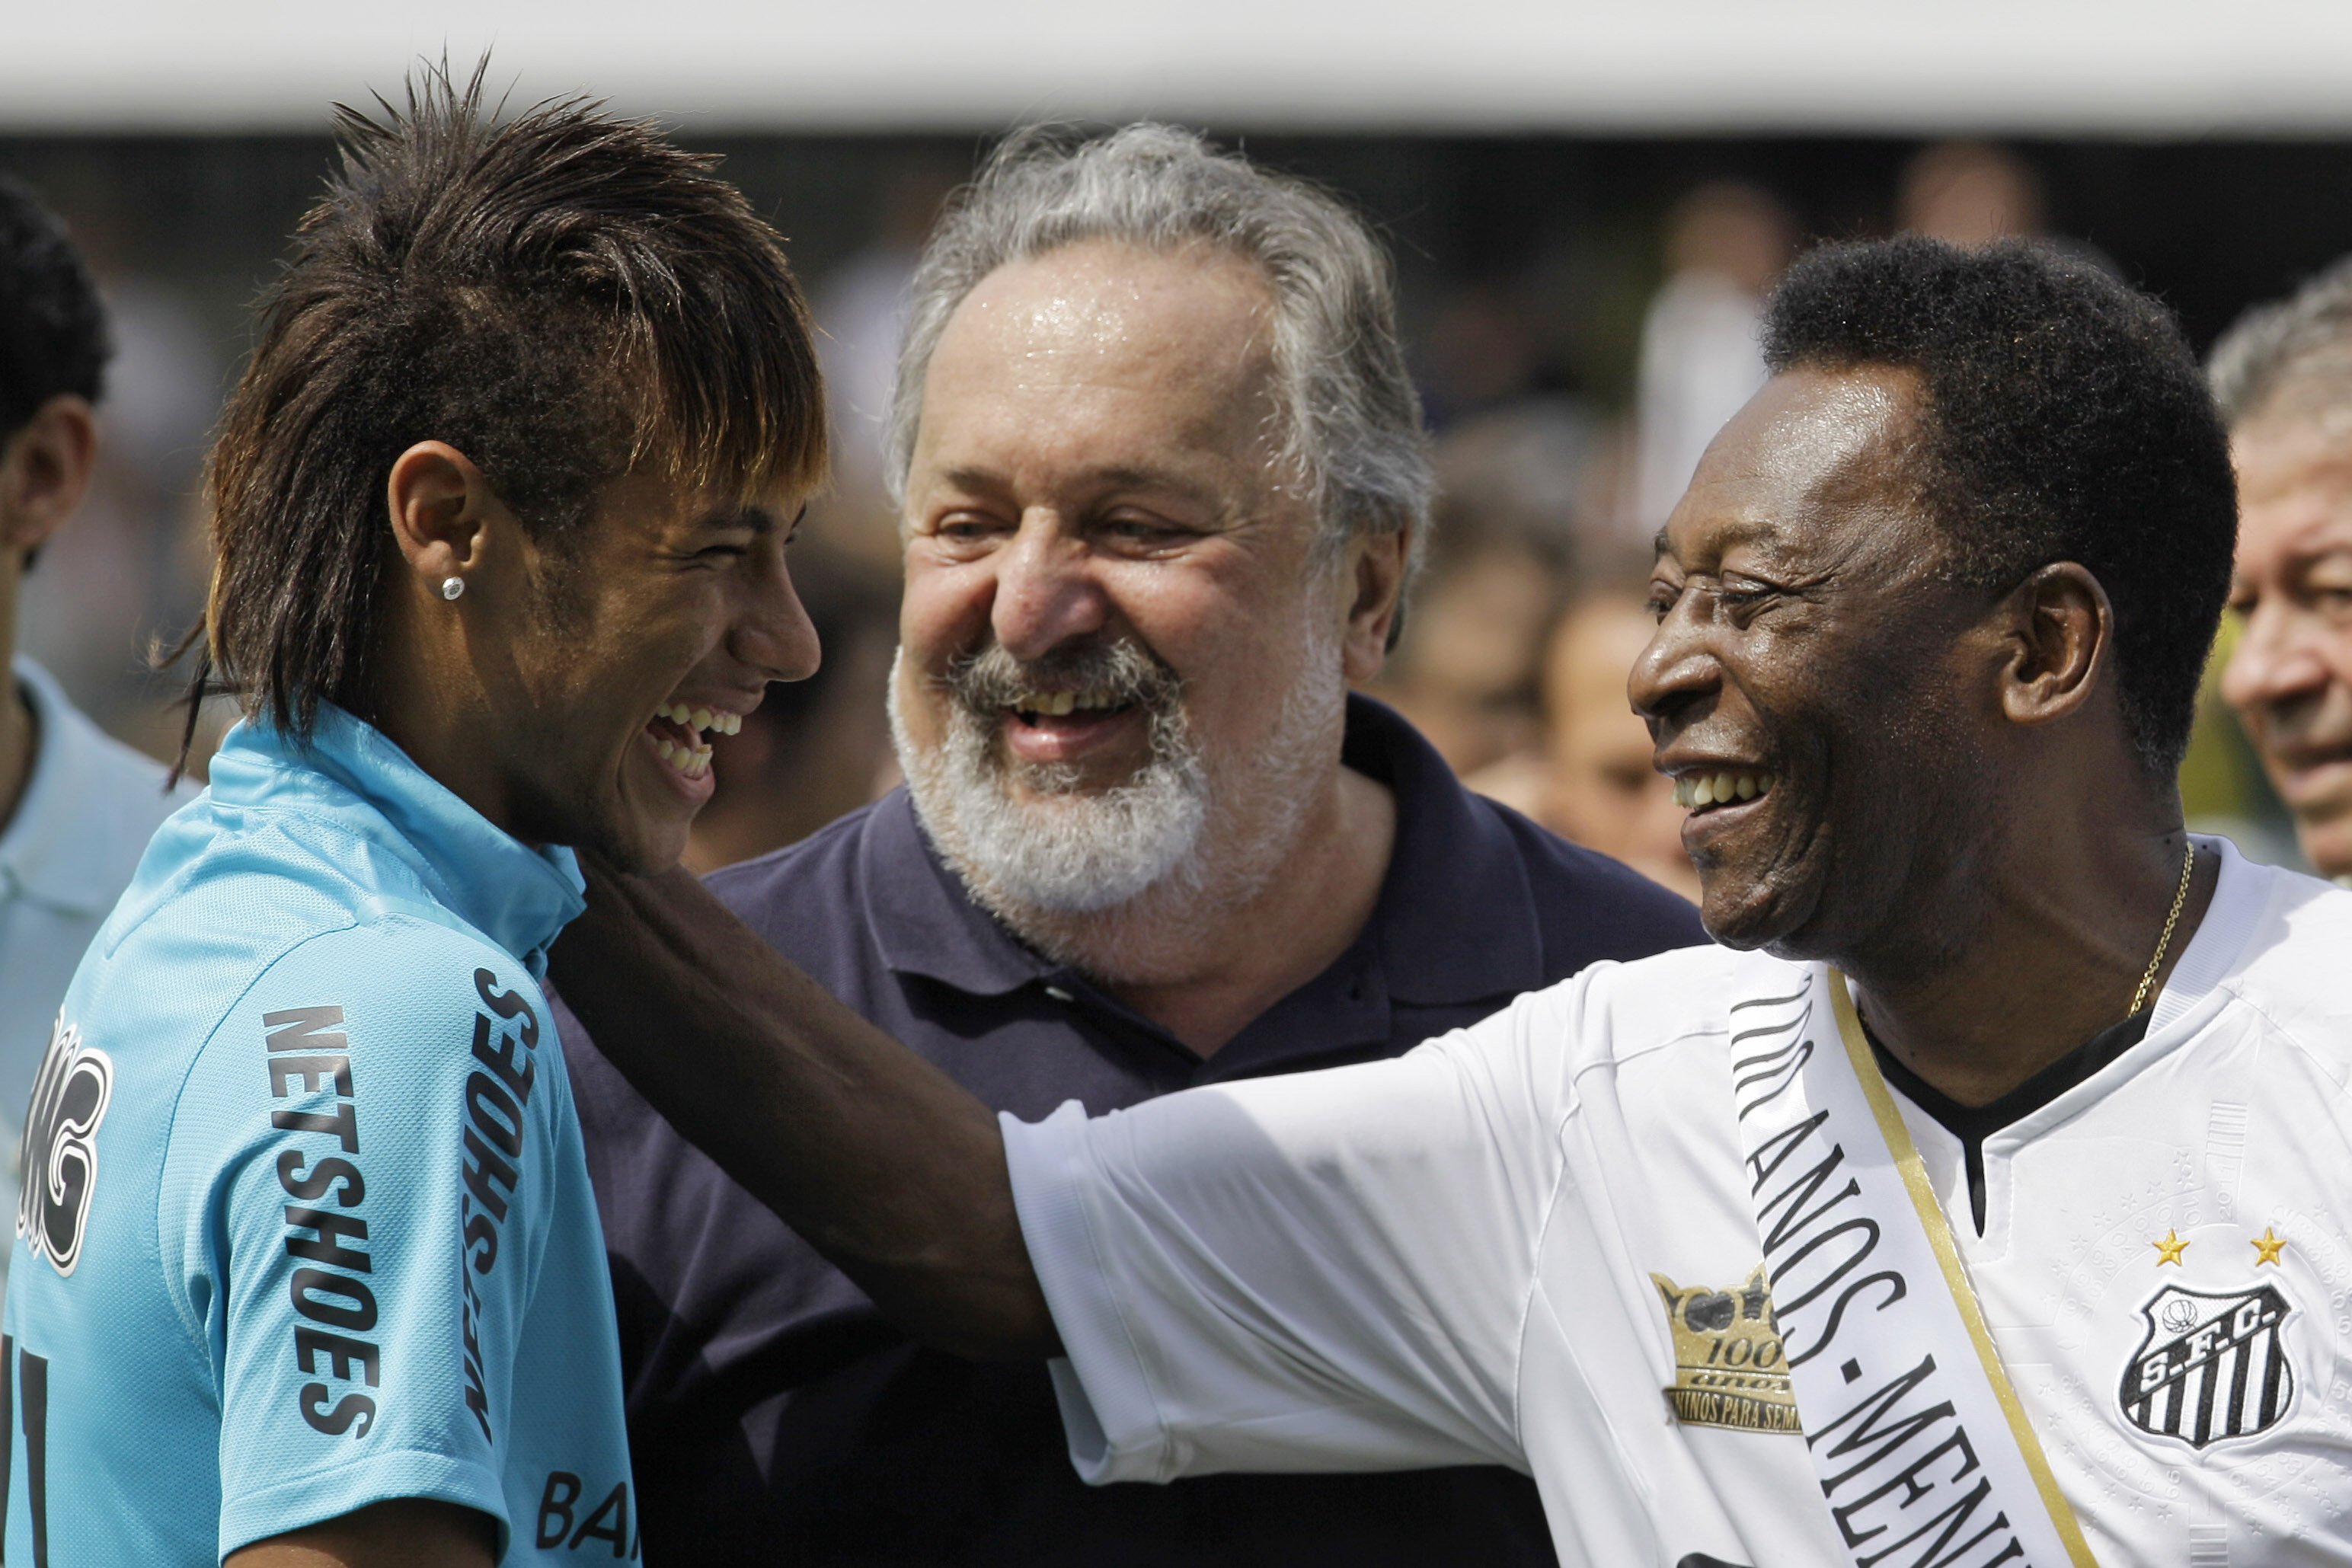 Feuding no more, Pelé joins world in mourning Diego Maradona